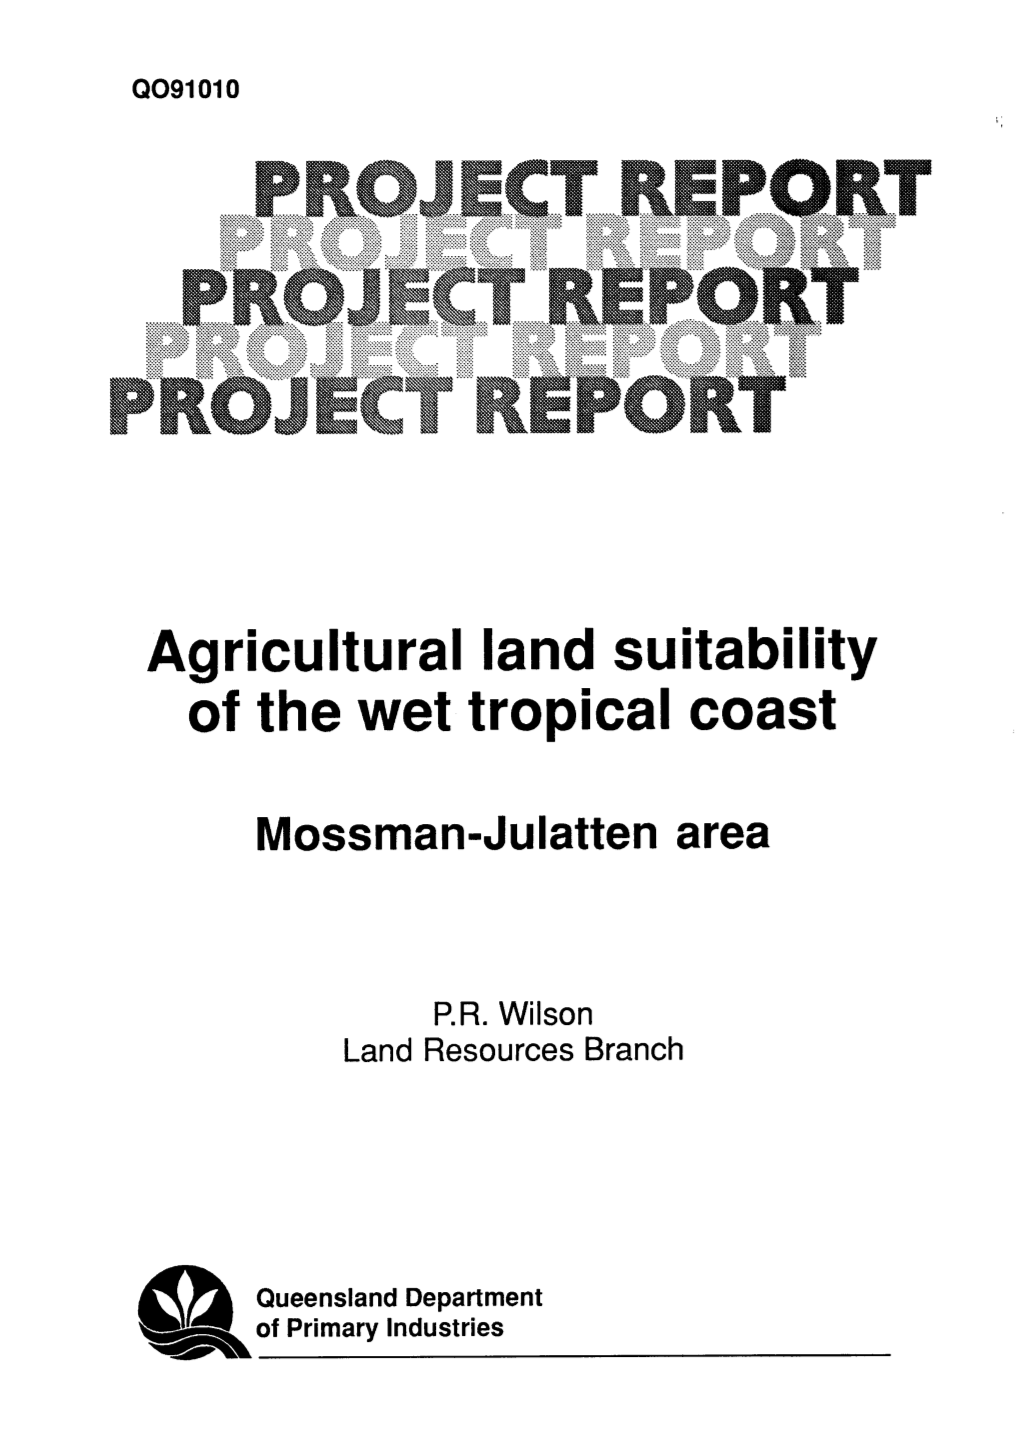 Agricultural Land Suitability of the Wet Tropical Coast